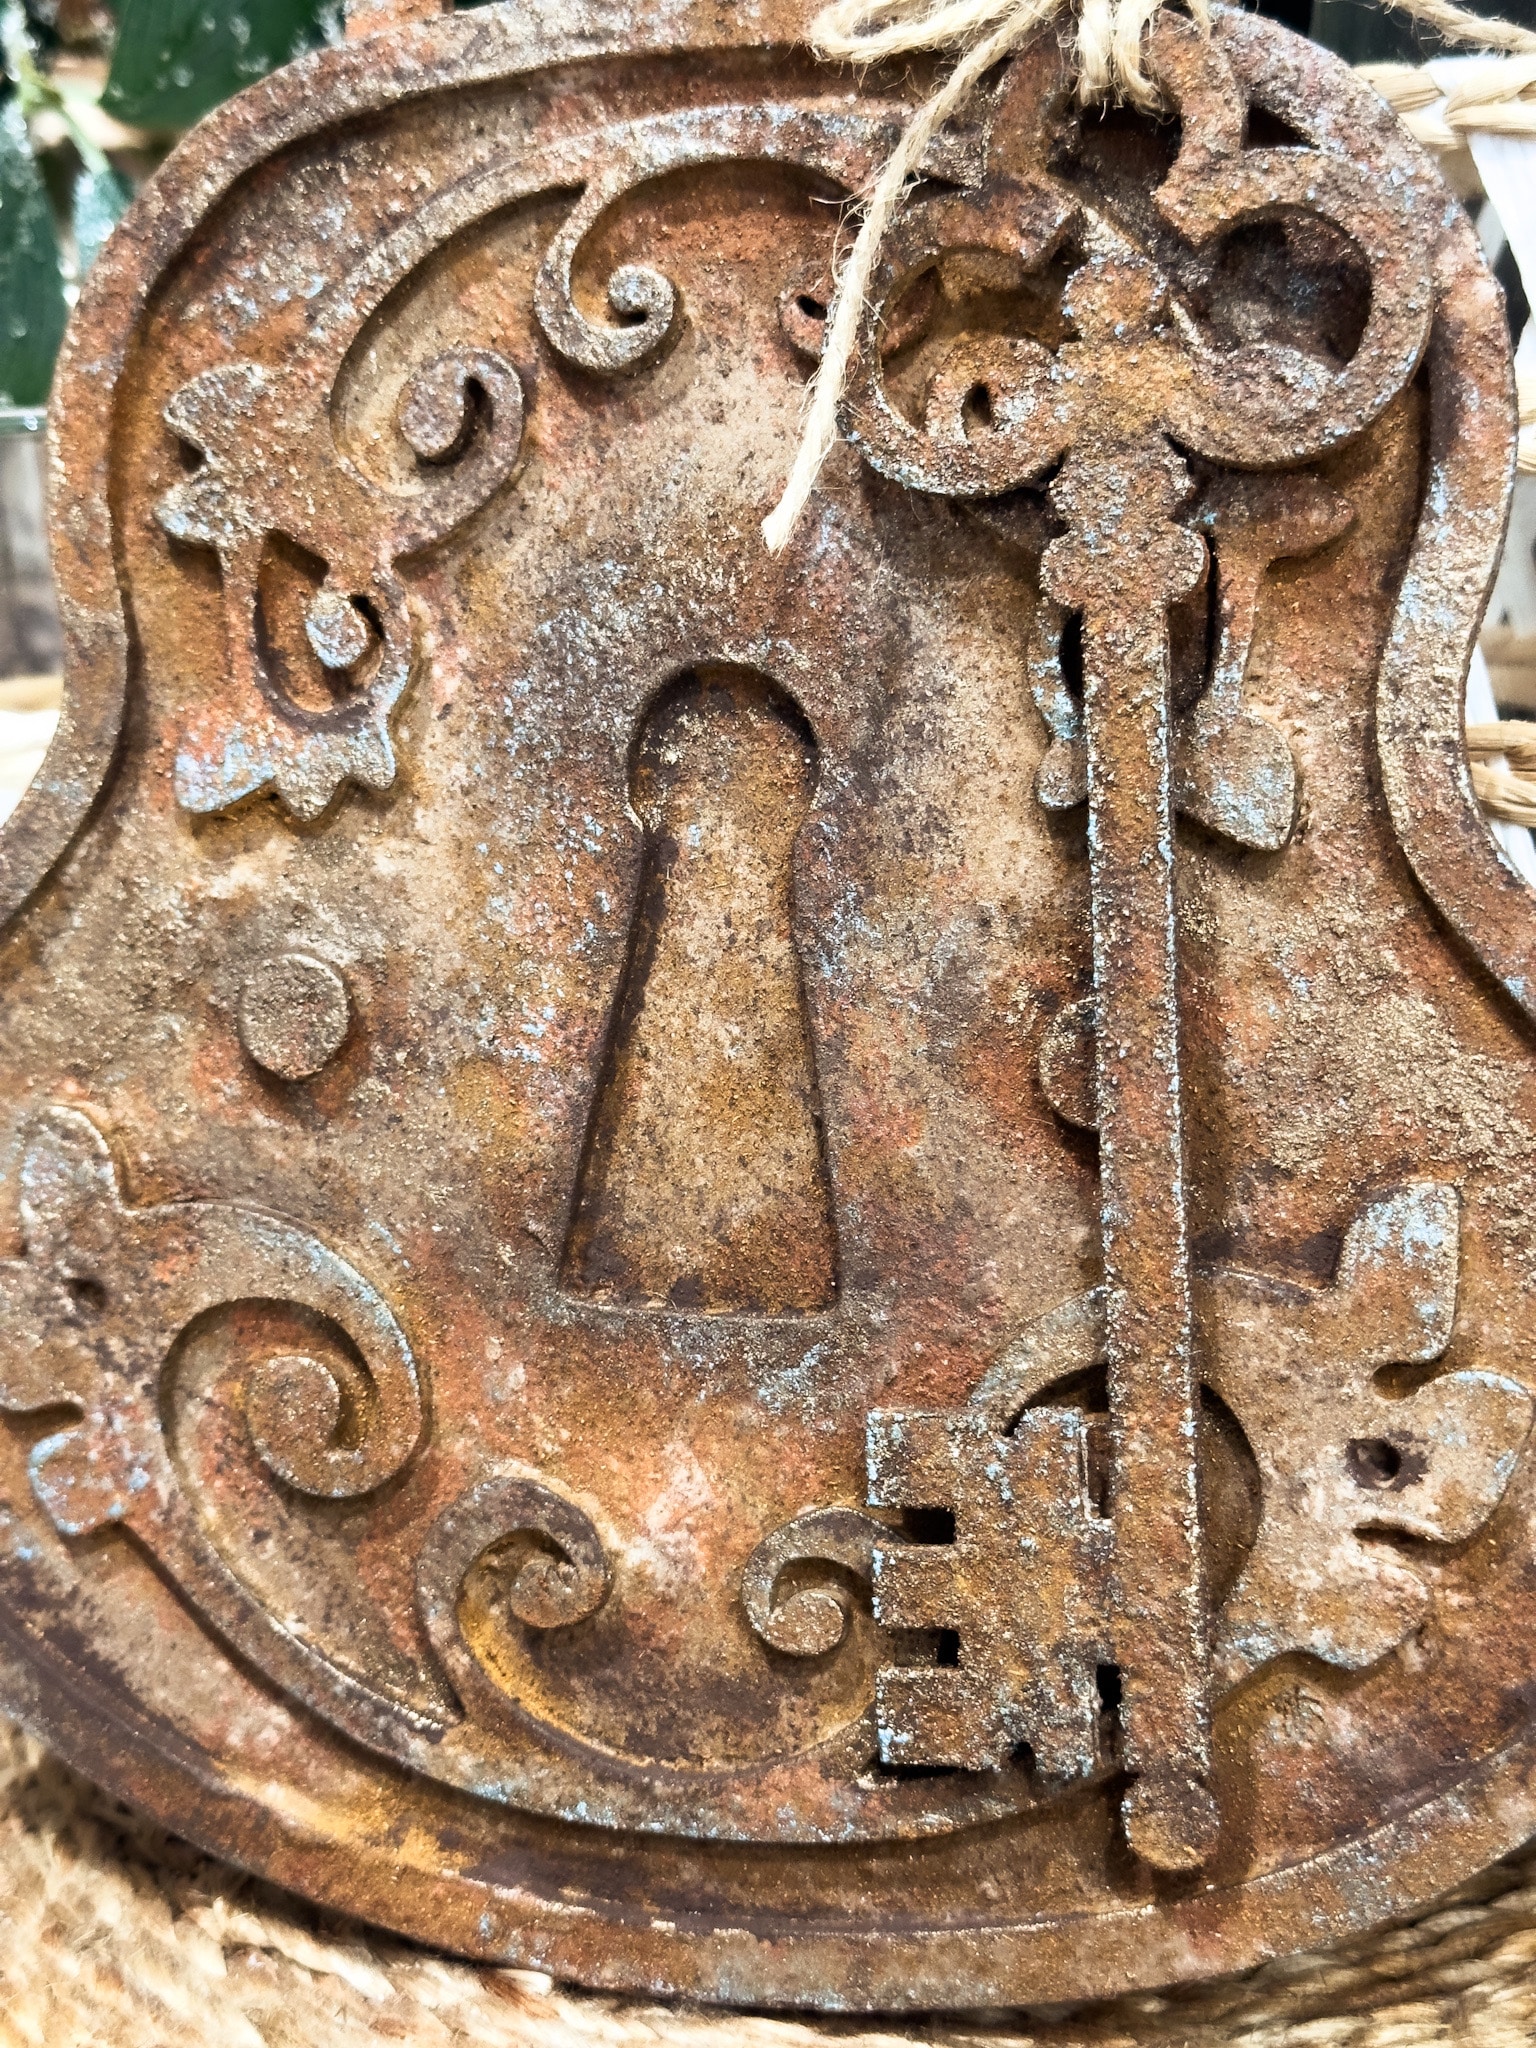 Faux Rusted Antique Lock and Key